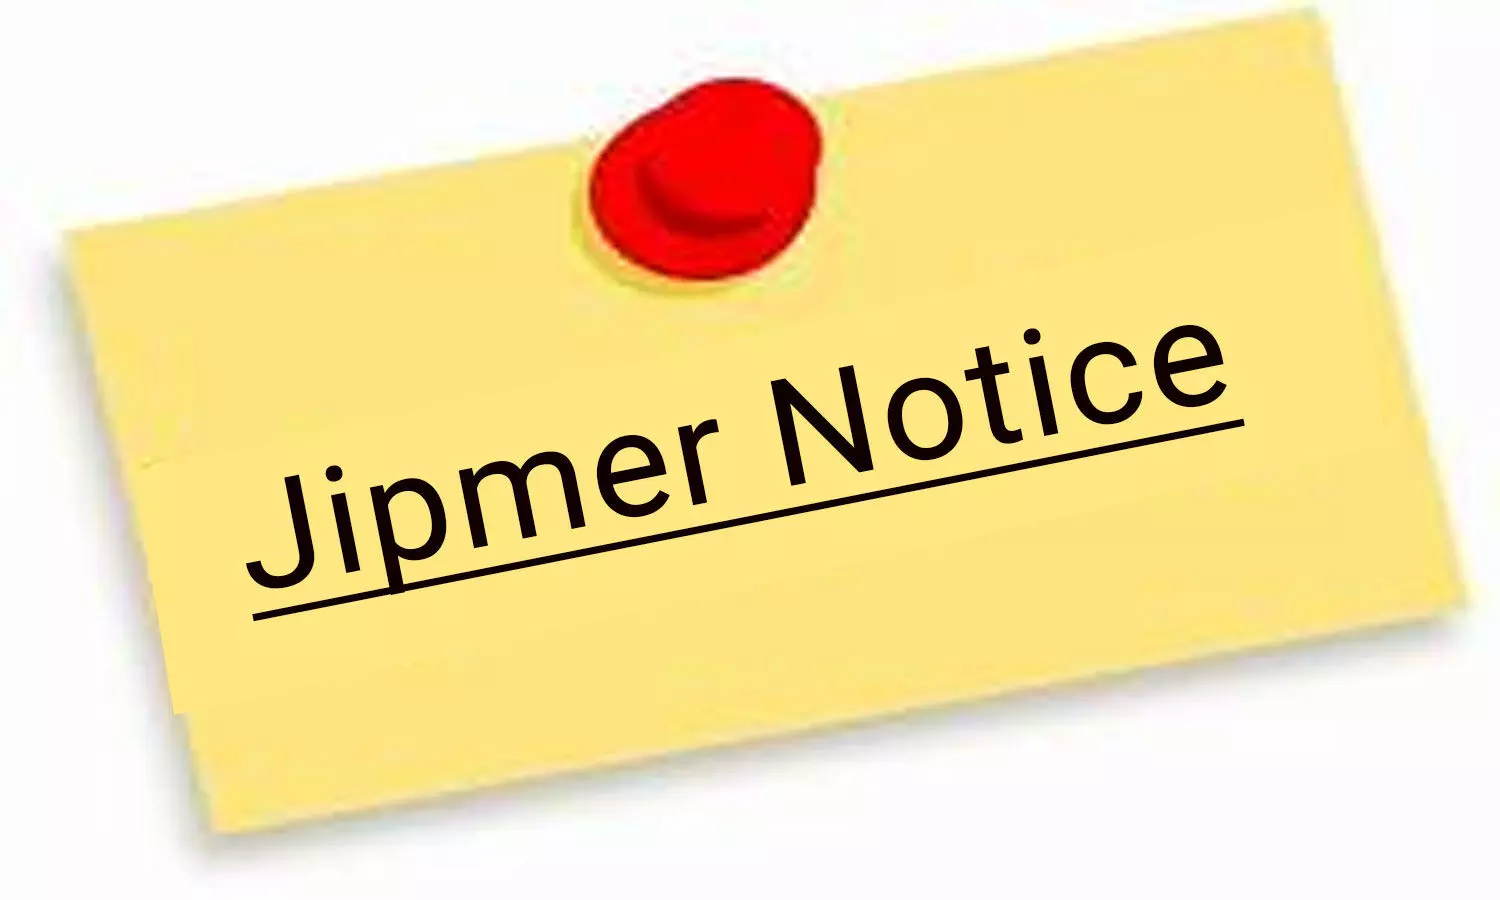 JIPMER releases Recall Instructions for final MBBS part 1 Students, Details